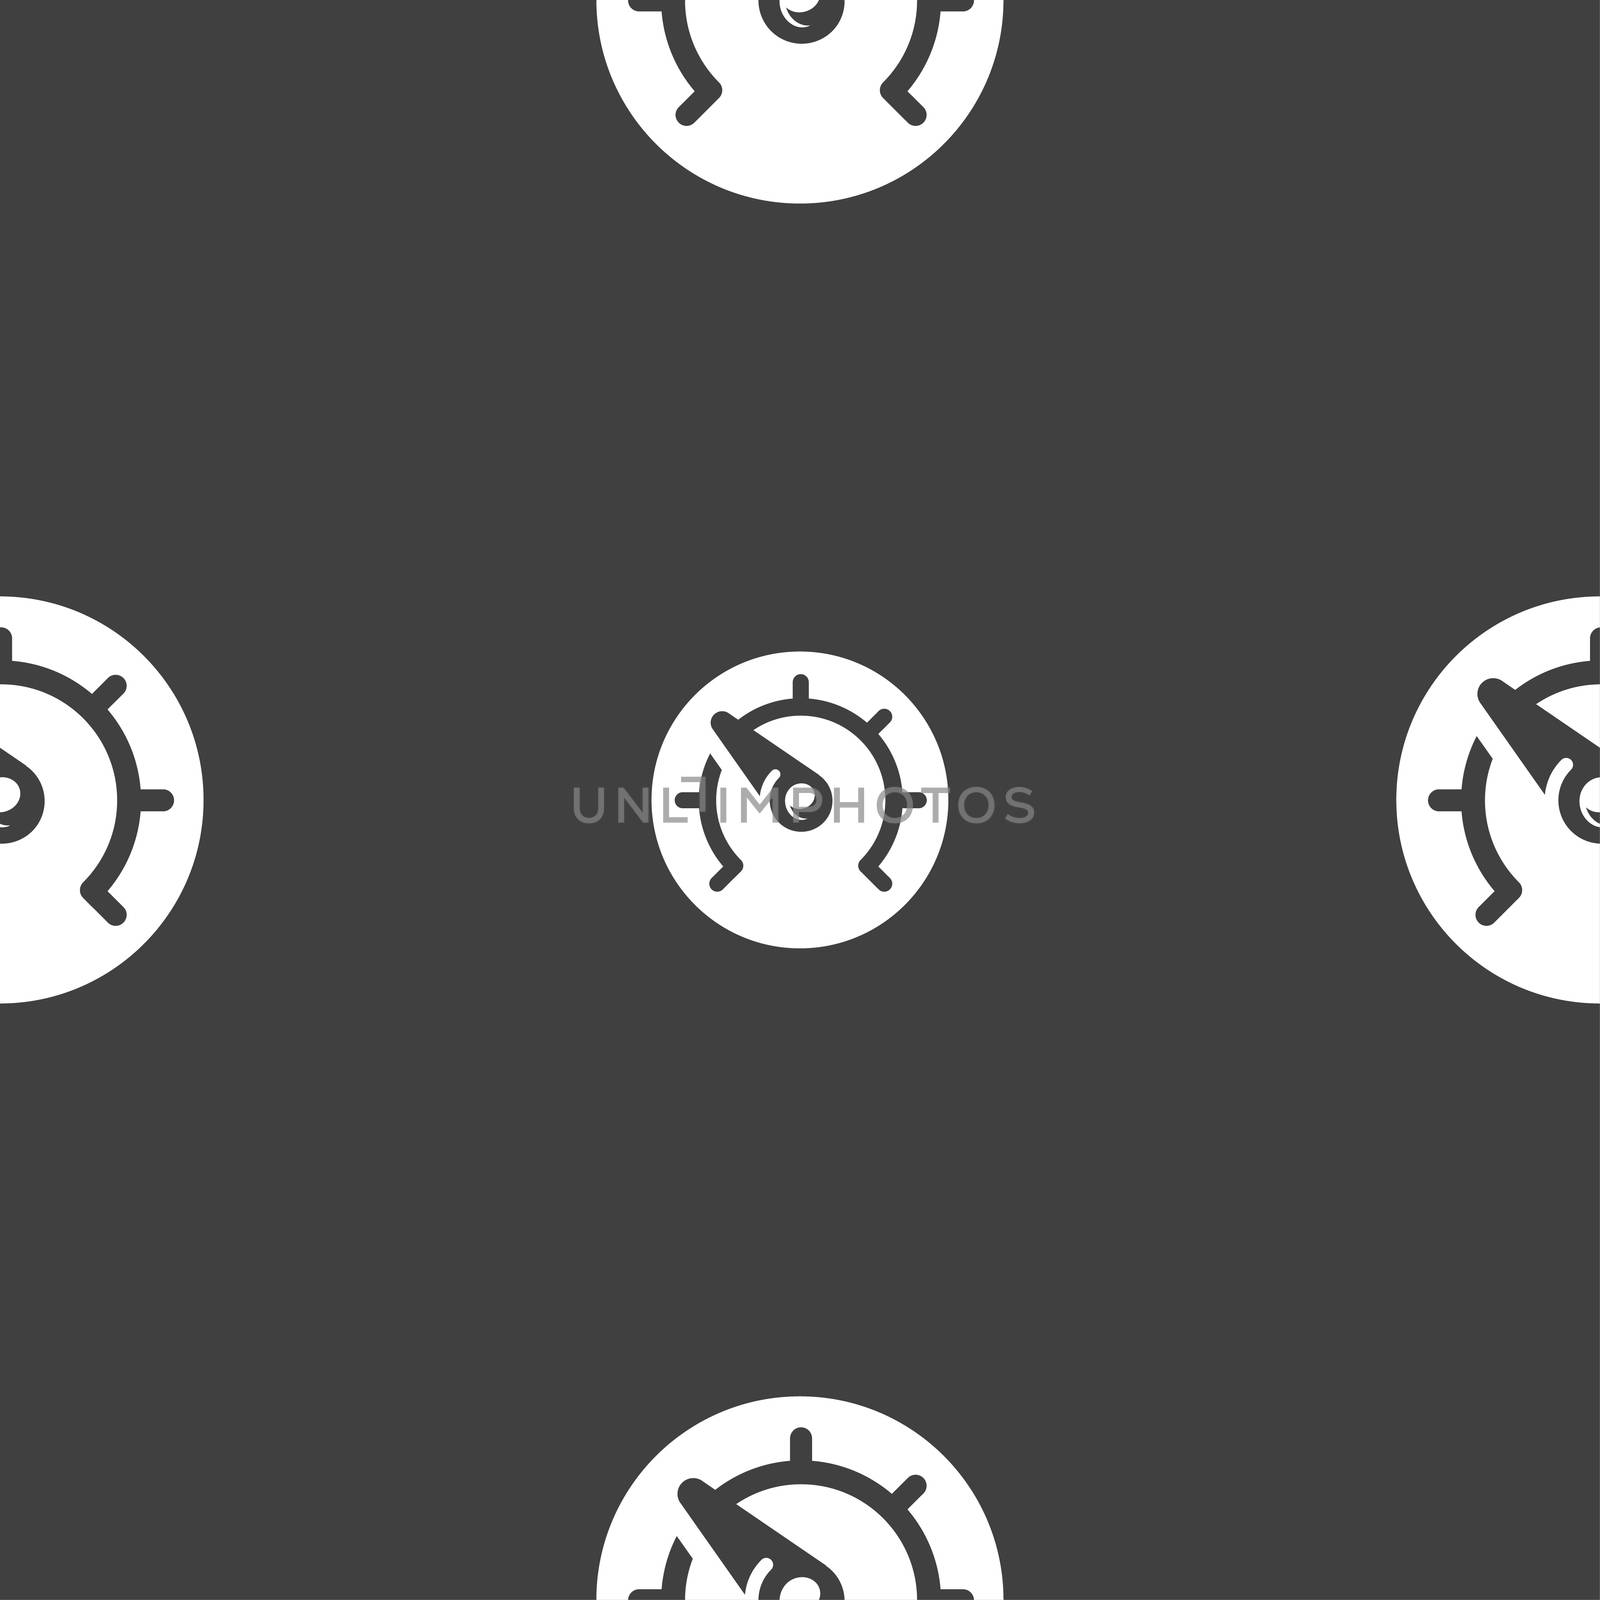 speed, speedometer icon sign. Seamless pattern on a gray background. illustration